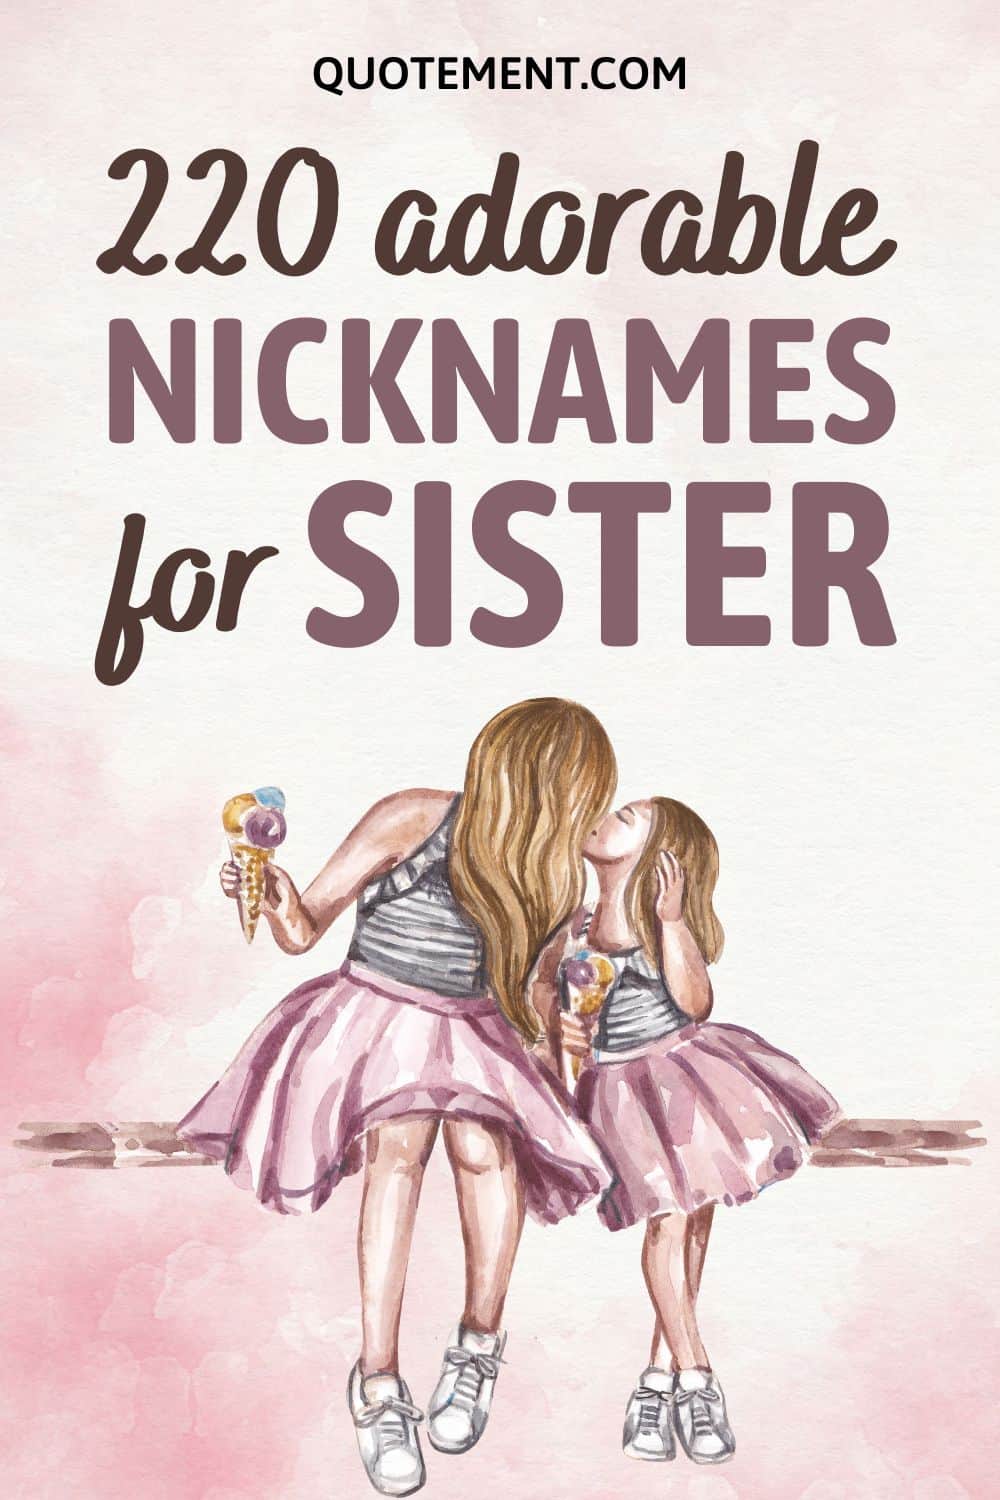 220 Nicknames For Sister That Are Just As Cool As She Is